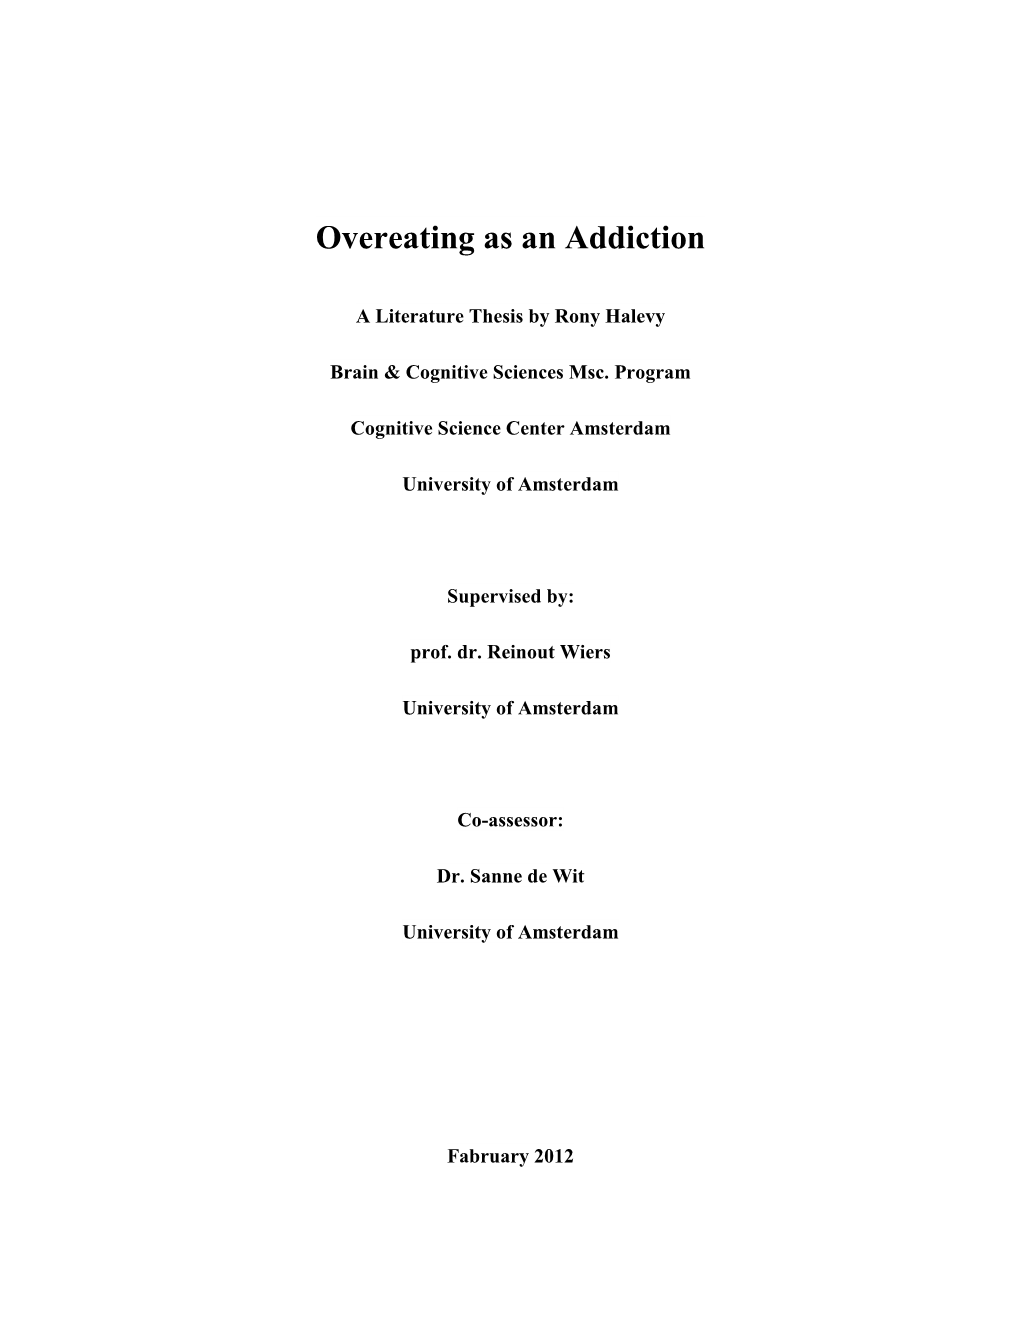 Overeating As an Addiction